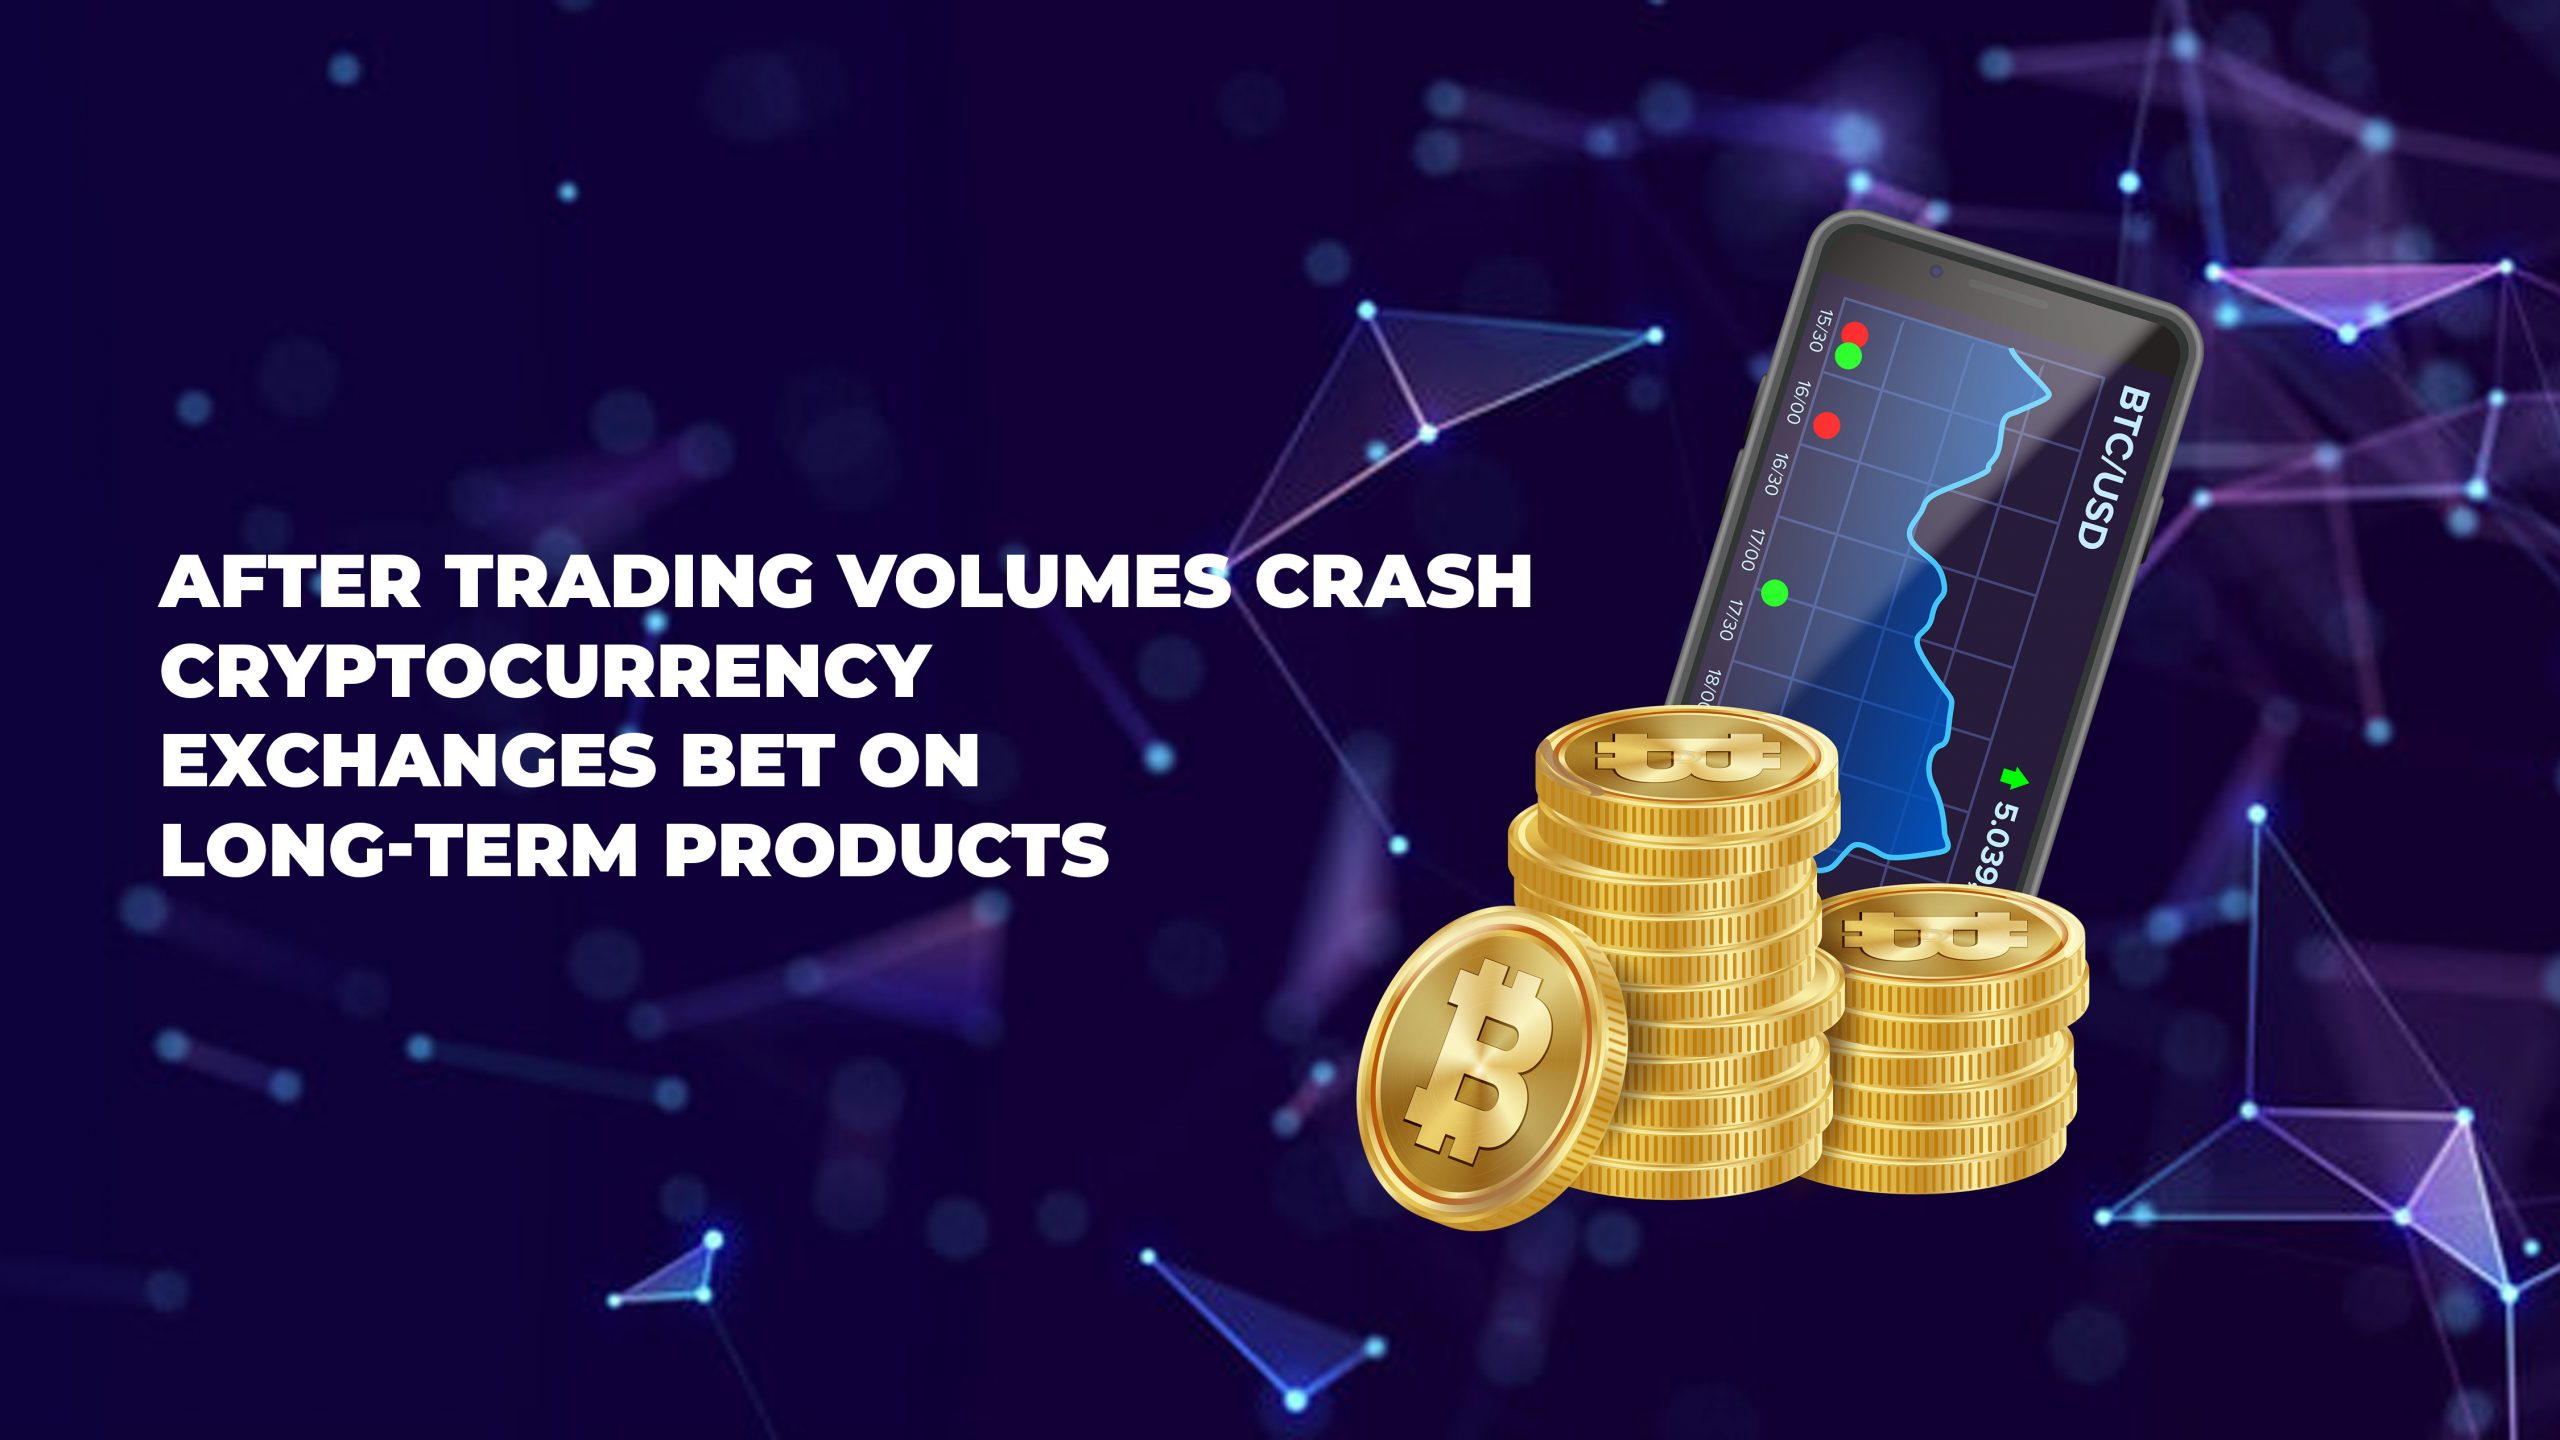 After Trading Volumes Crash, Cryptocurrency Exchanges Bet on Long-Term Products